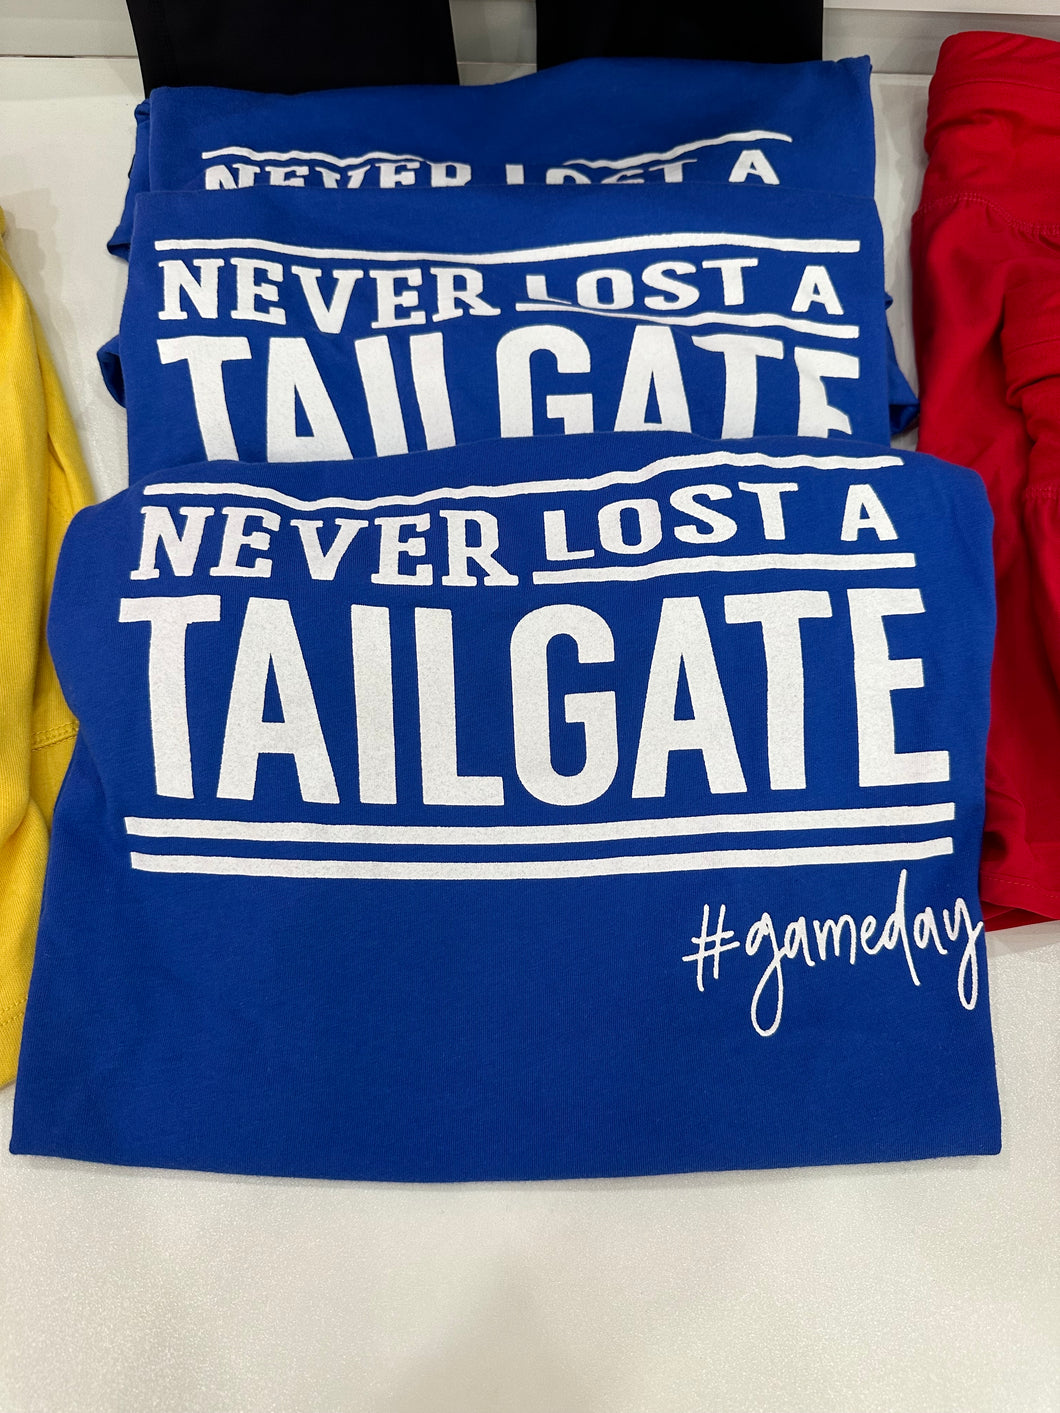 The Gameday Tee